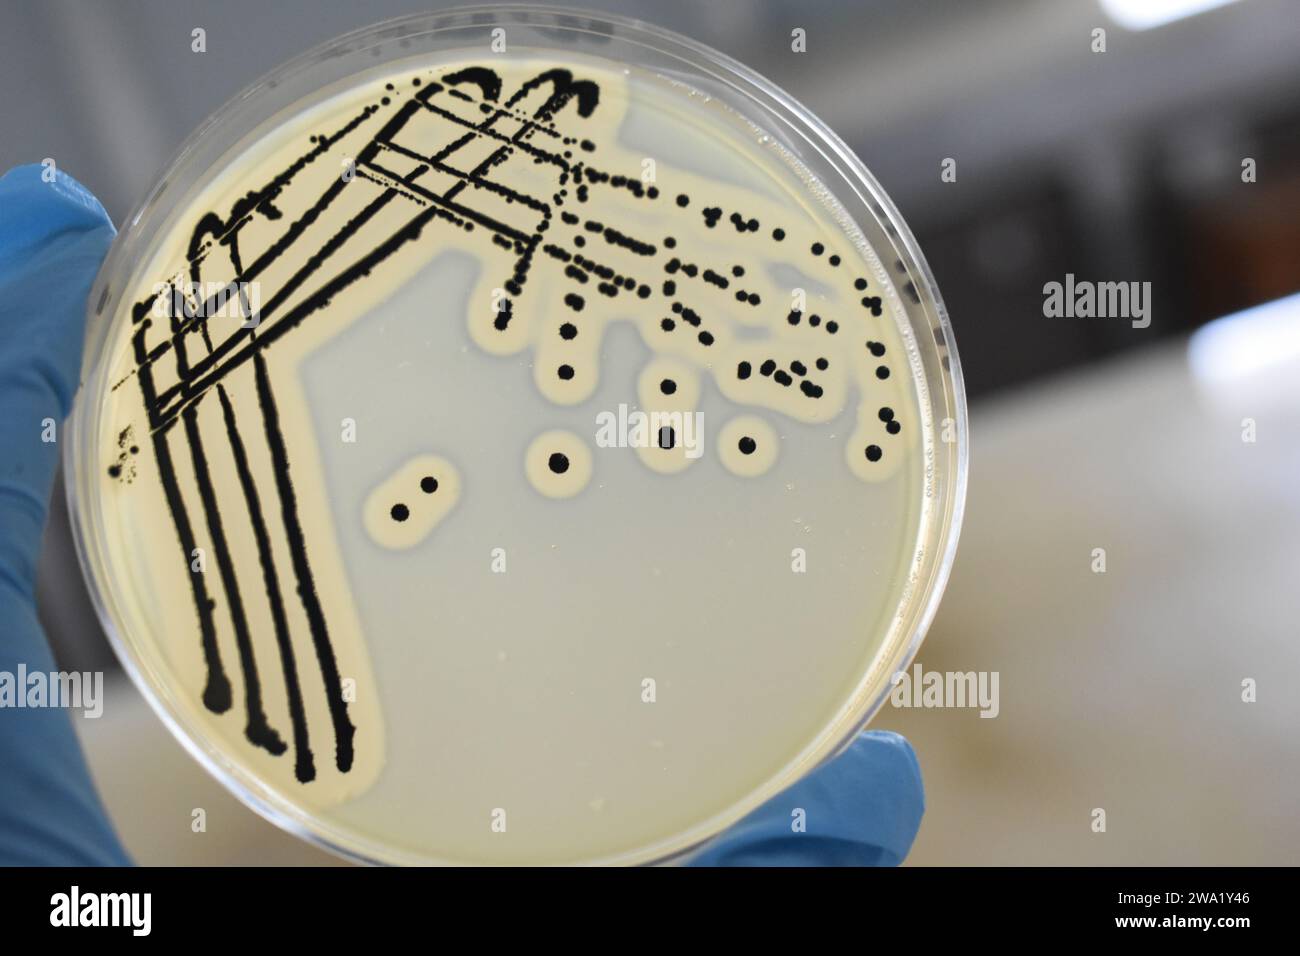 A quadrant streak of the bacterium, Staphylococcus aureus cultured or inoculated on a Baird-Parker agar plate with egg tellurite. Stock Photo